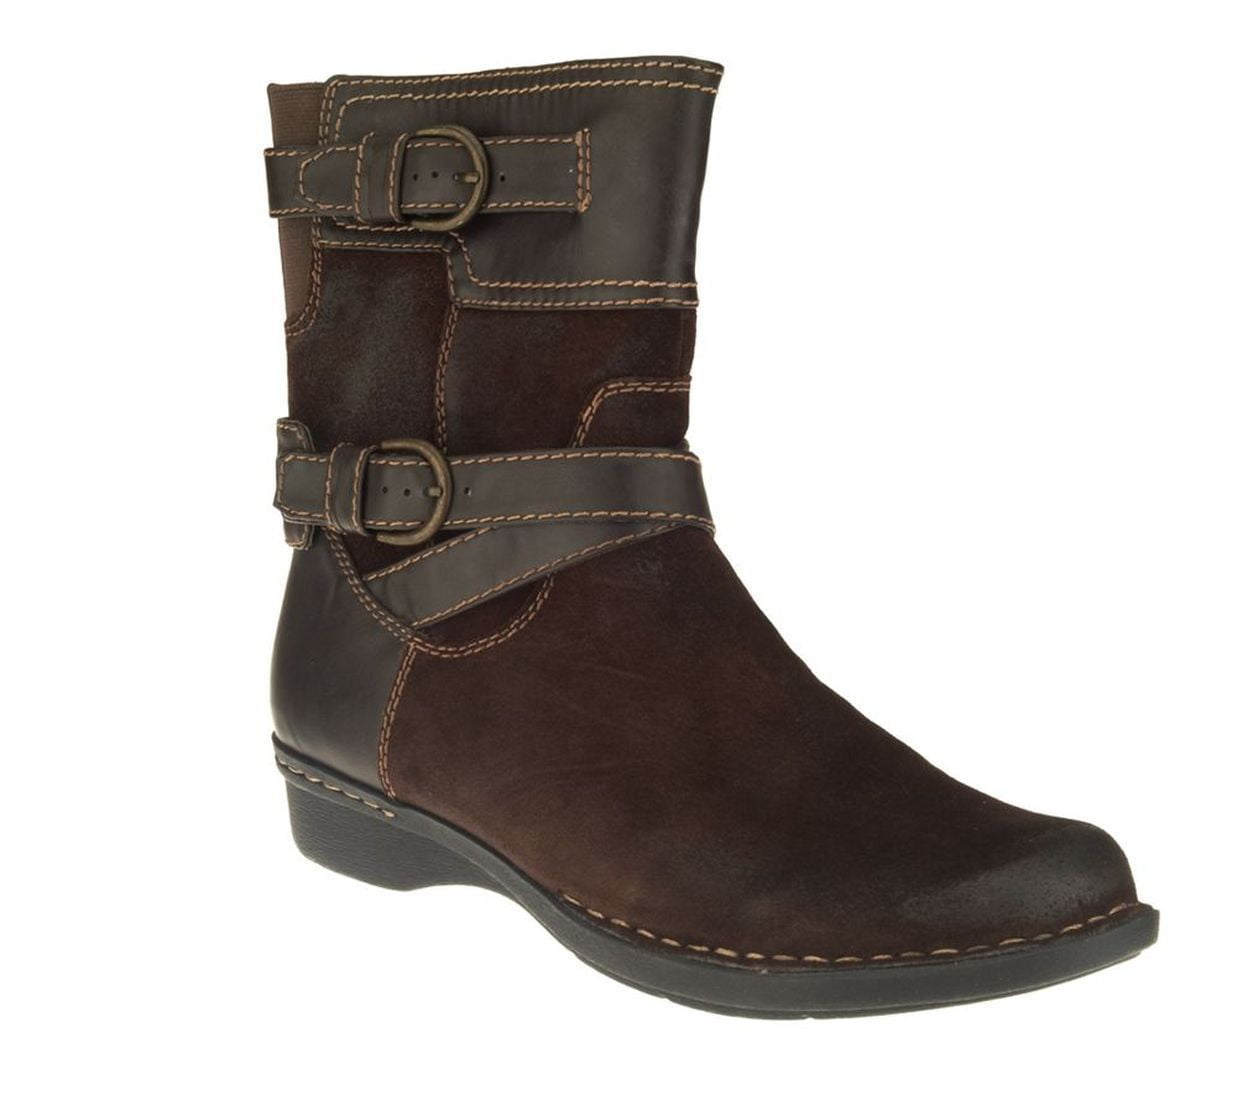 Clarks Bendables Whistle Ranch Suede Ankle Boots A236979 - Walmart.com